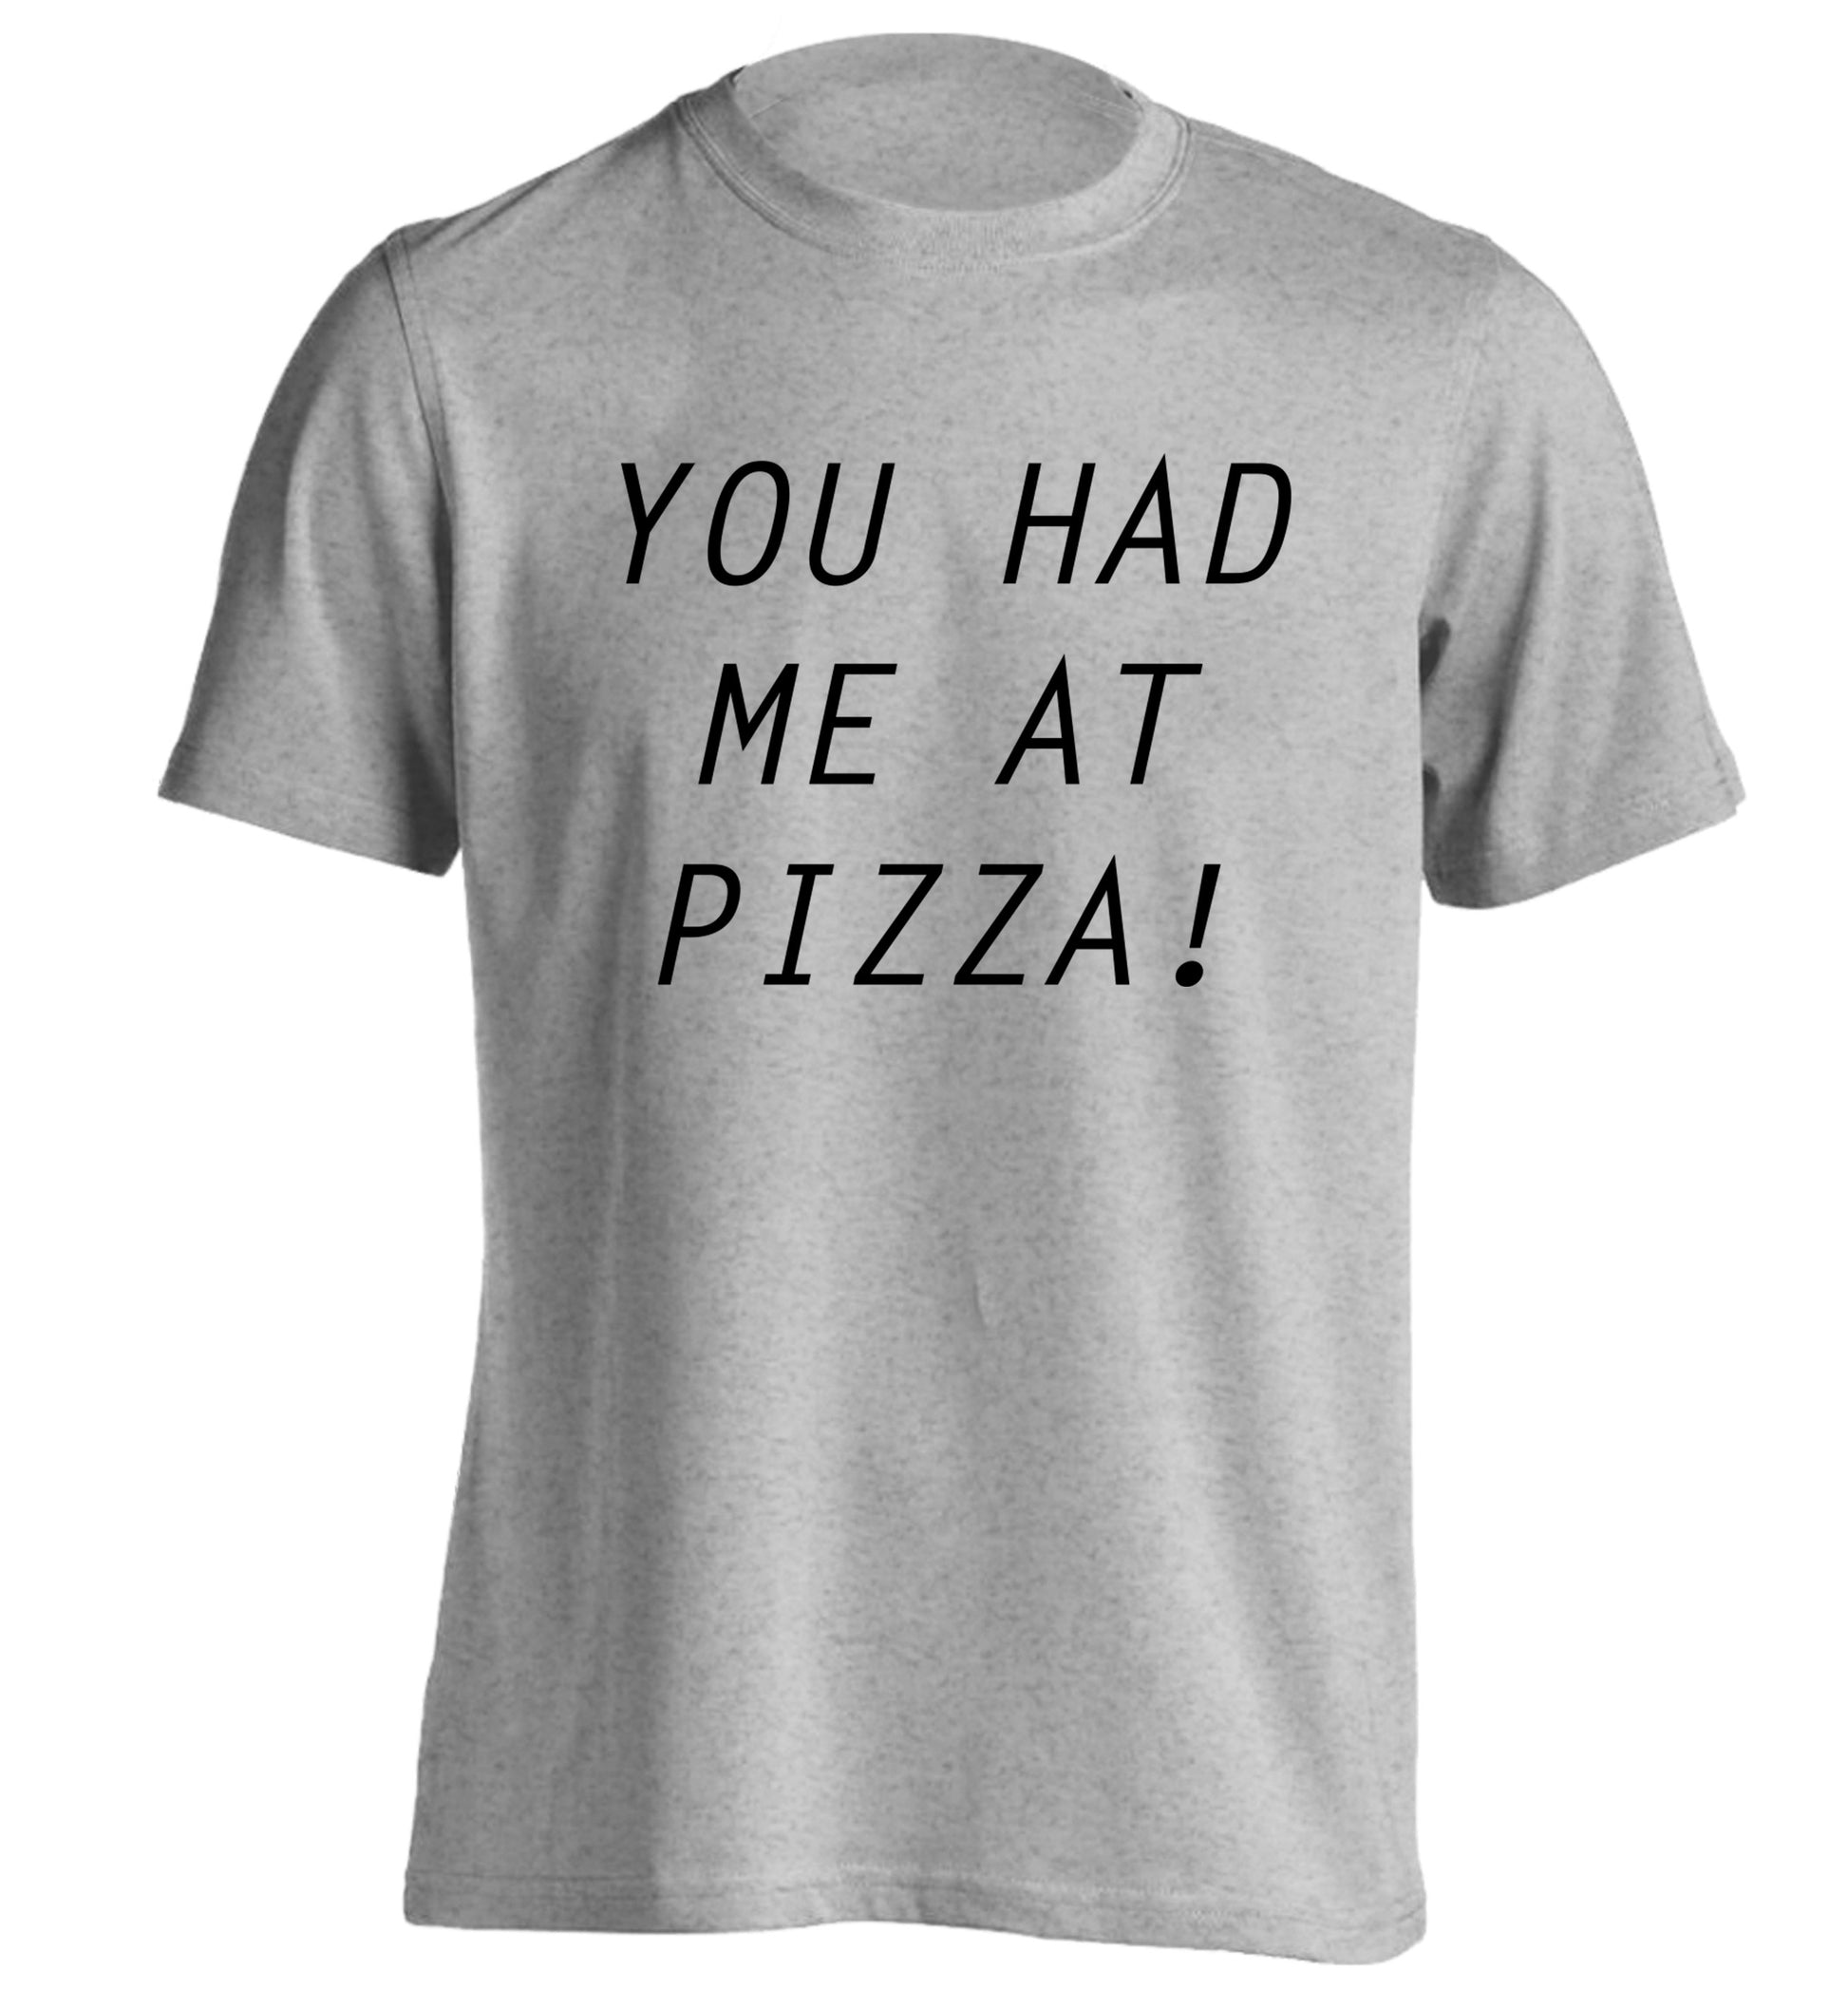 You had me at pizza adults unisex grey Tshirt 2XL